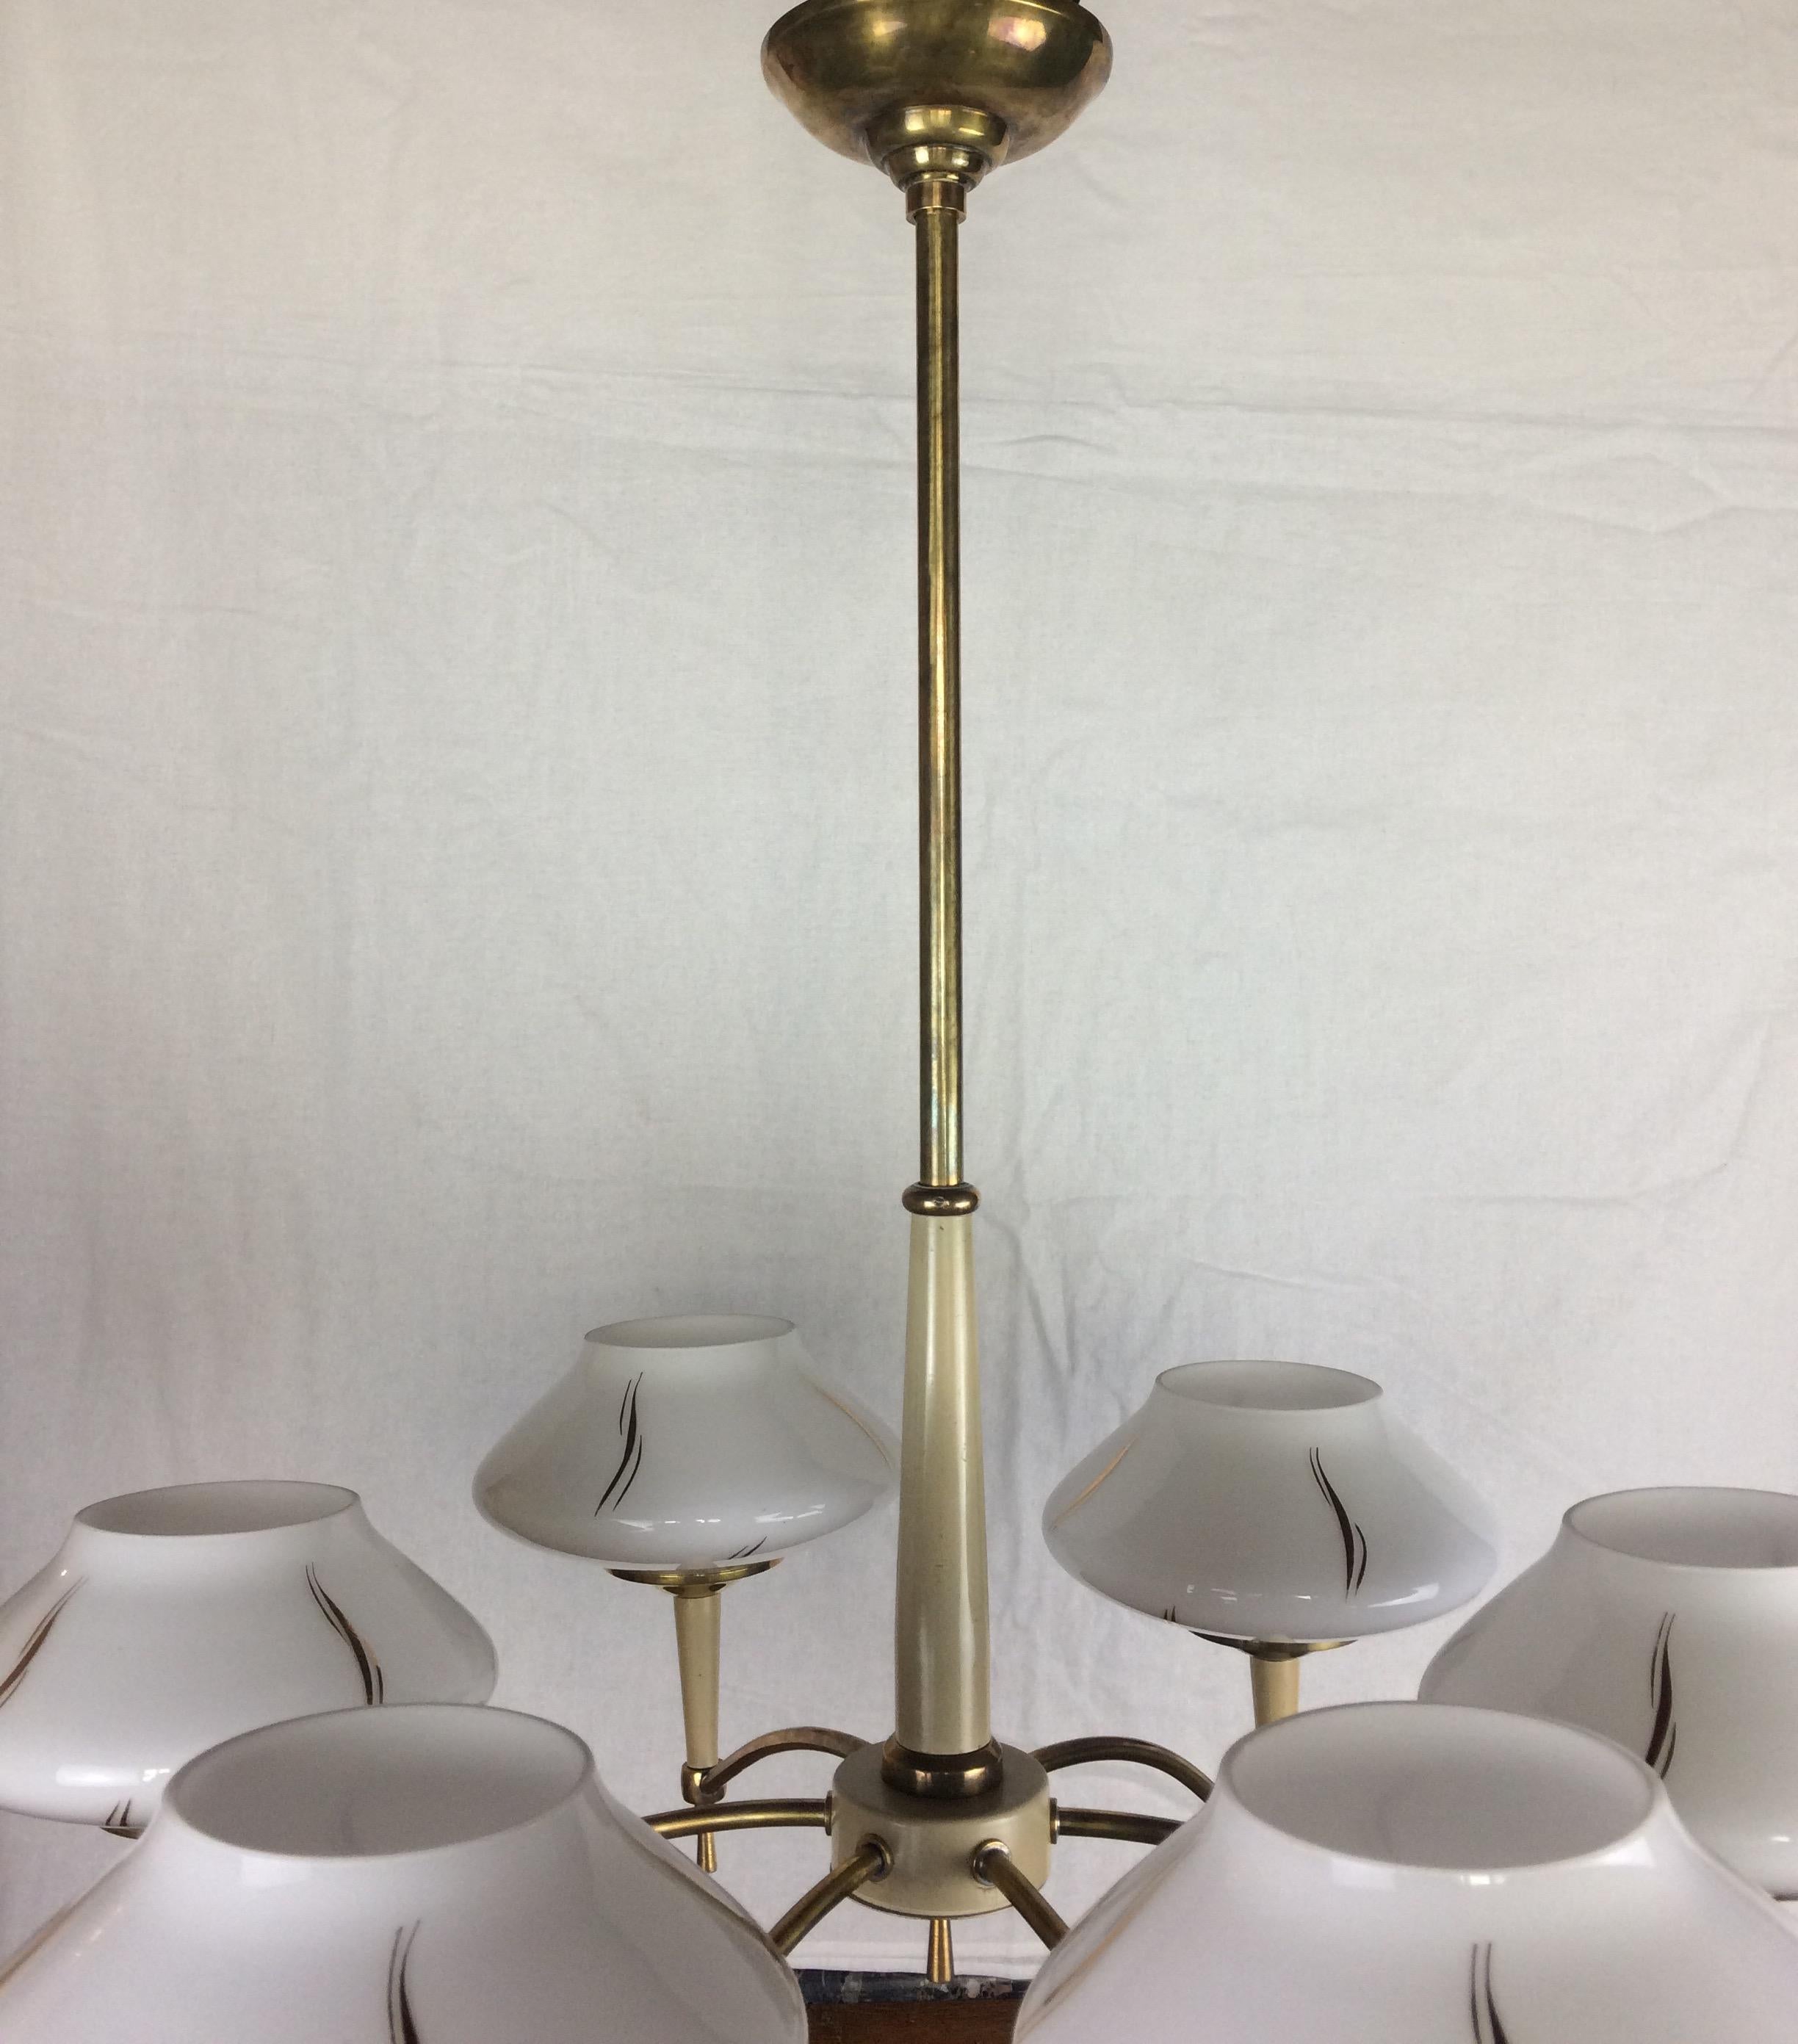 Maison Arlus Midcentury Glass Globe 6-Arm Chandelier, circa 1950 In Good Condition For Sale In Miami, FL